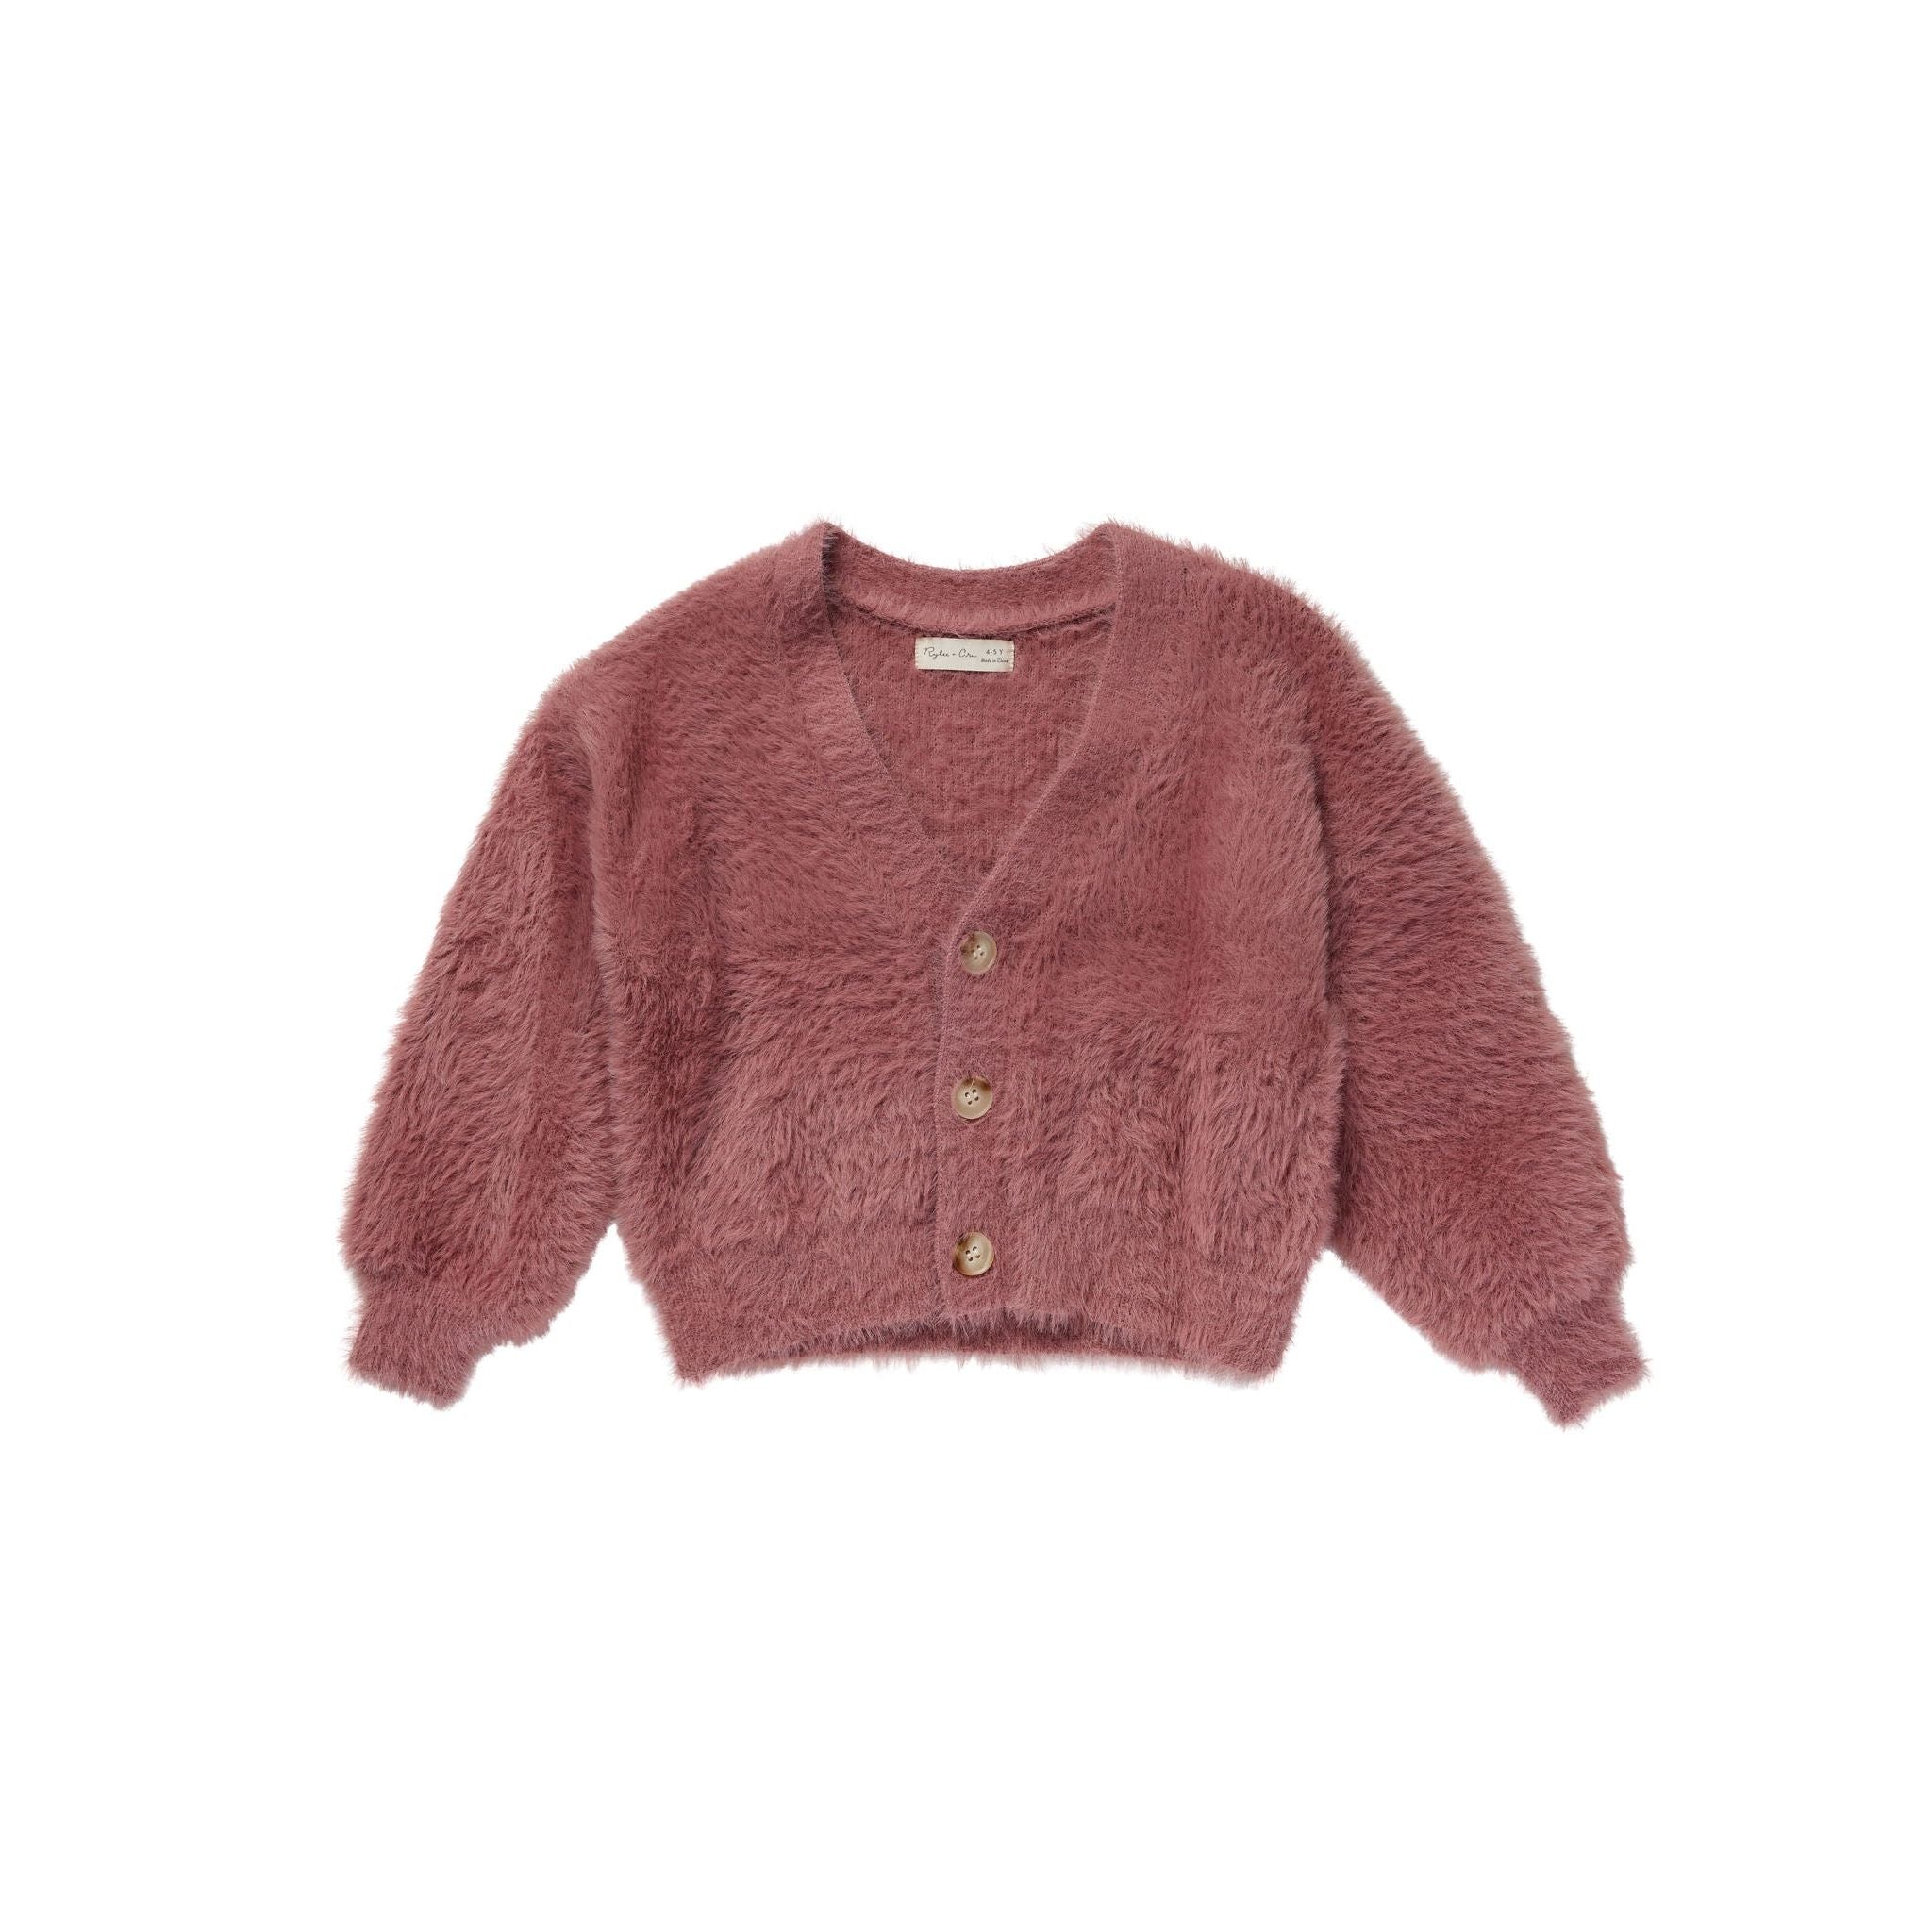 raspberry colored boxy cropped cardigan with buttons and bubble sleeves